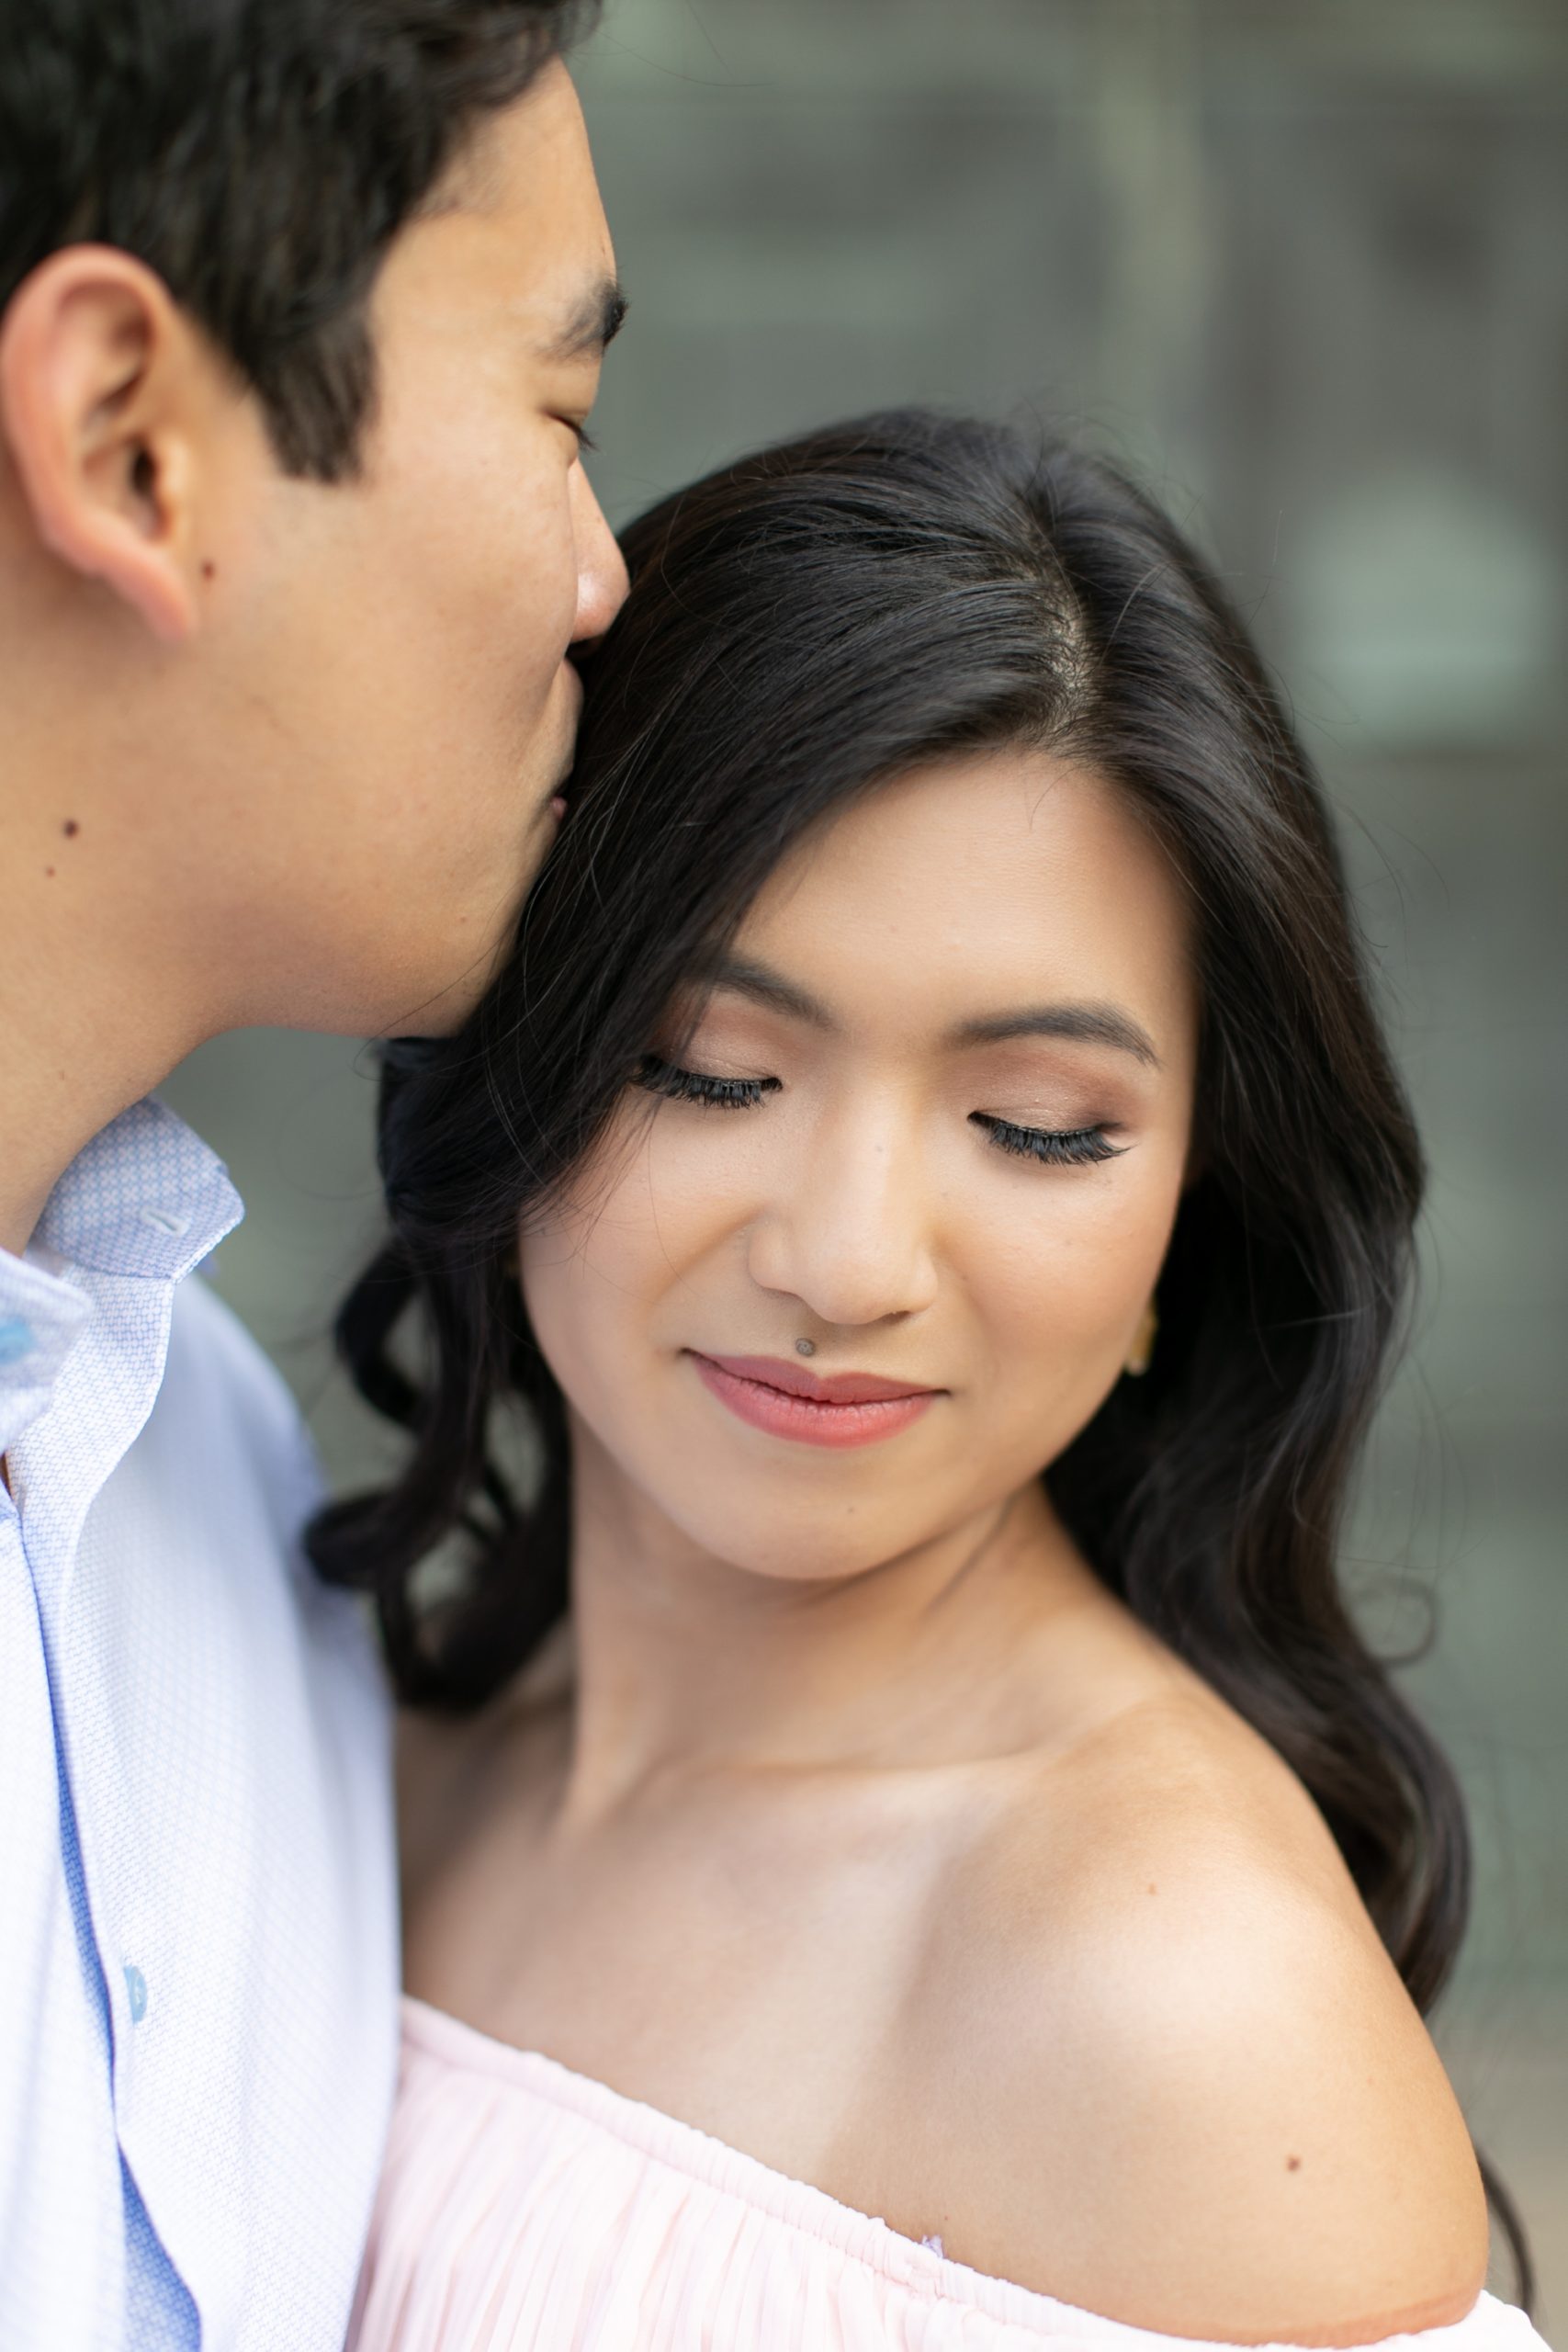 the man kissed the woman during the Chicago summer engagement photos